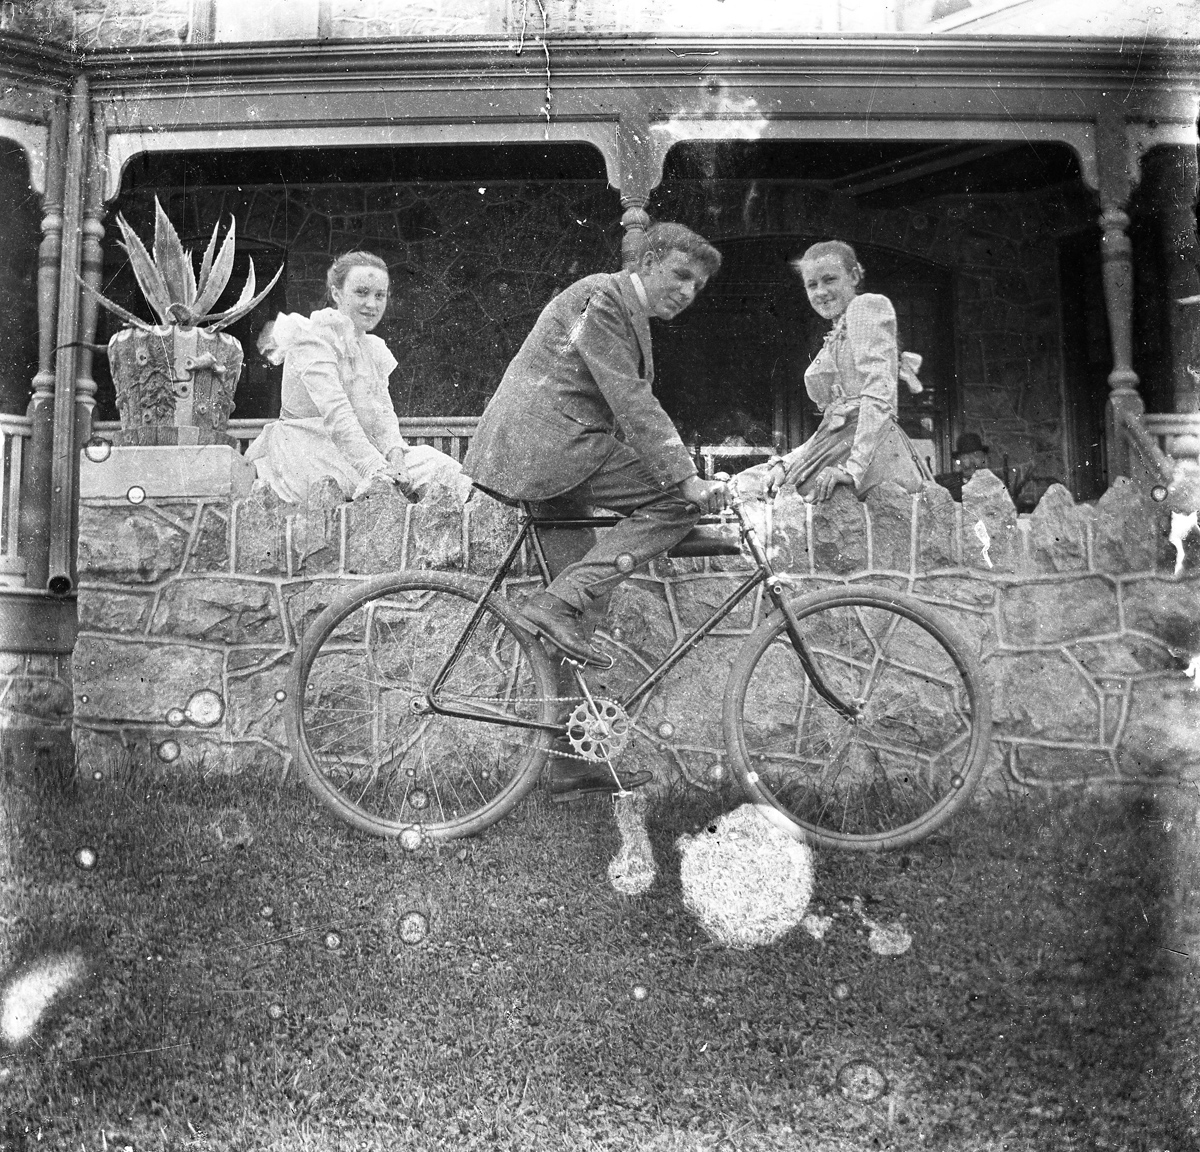 Black and white negative photograph of a man on a bike, flanked by two women sitting on a wall.